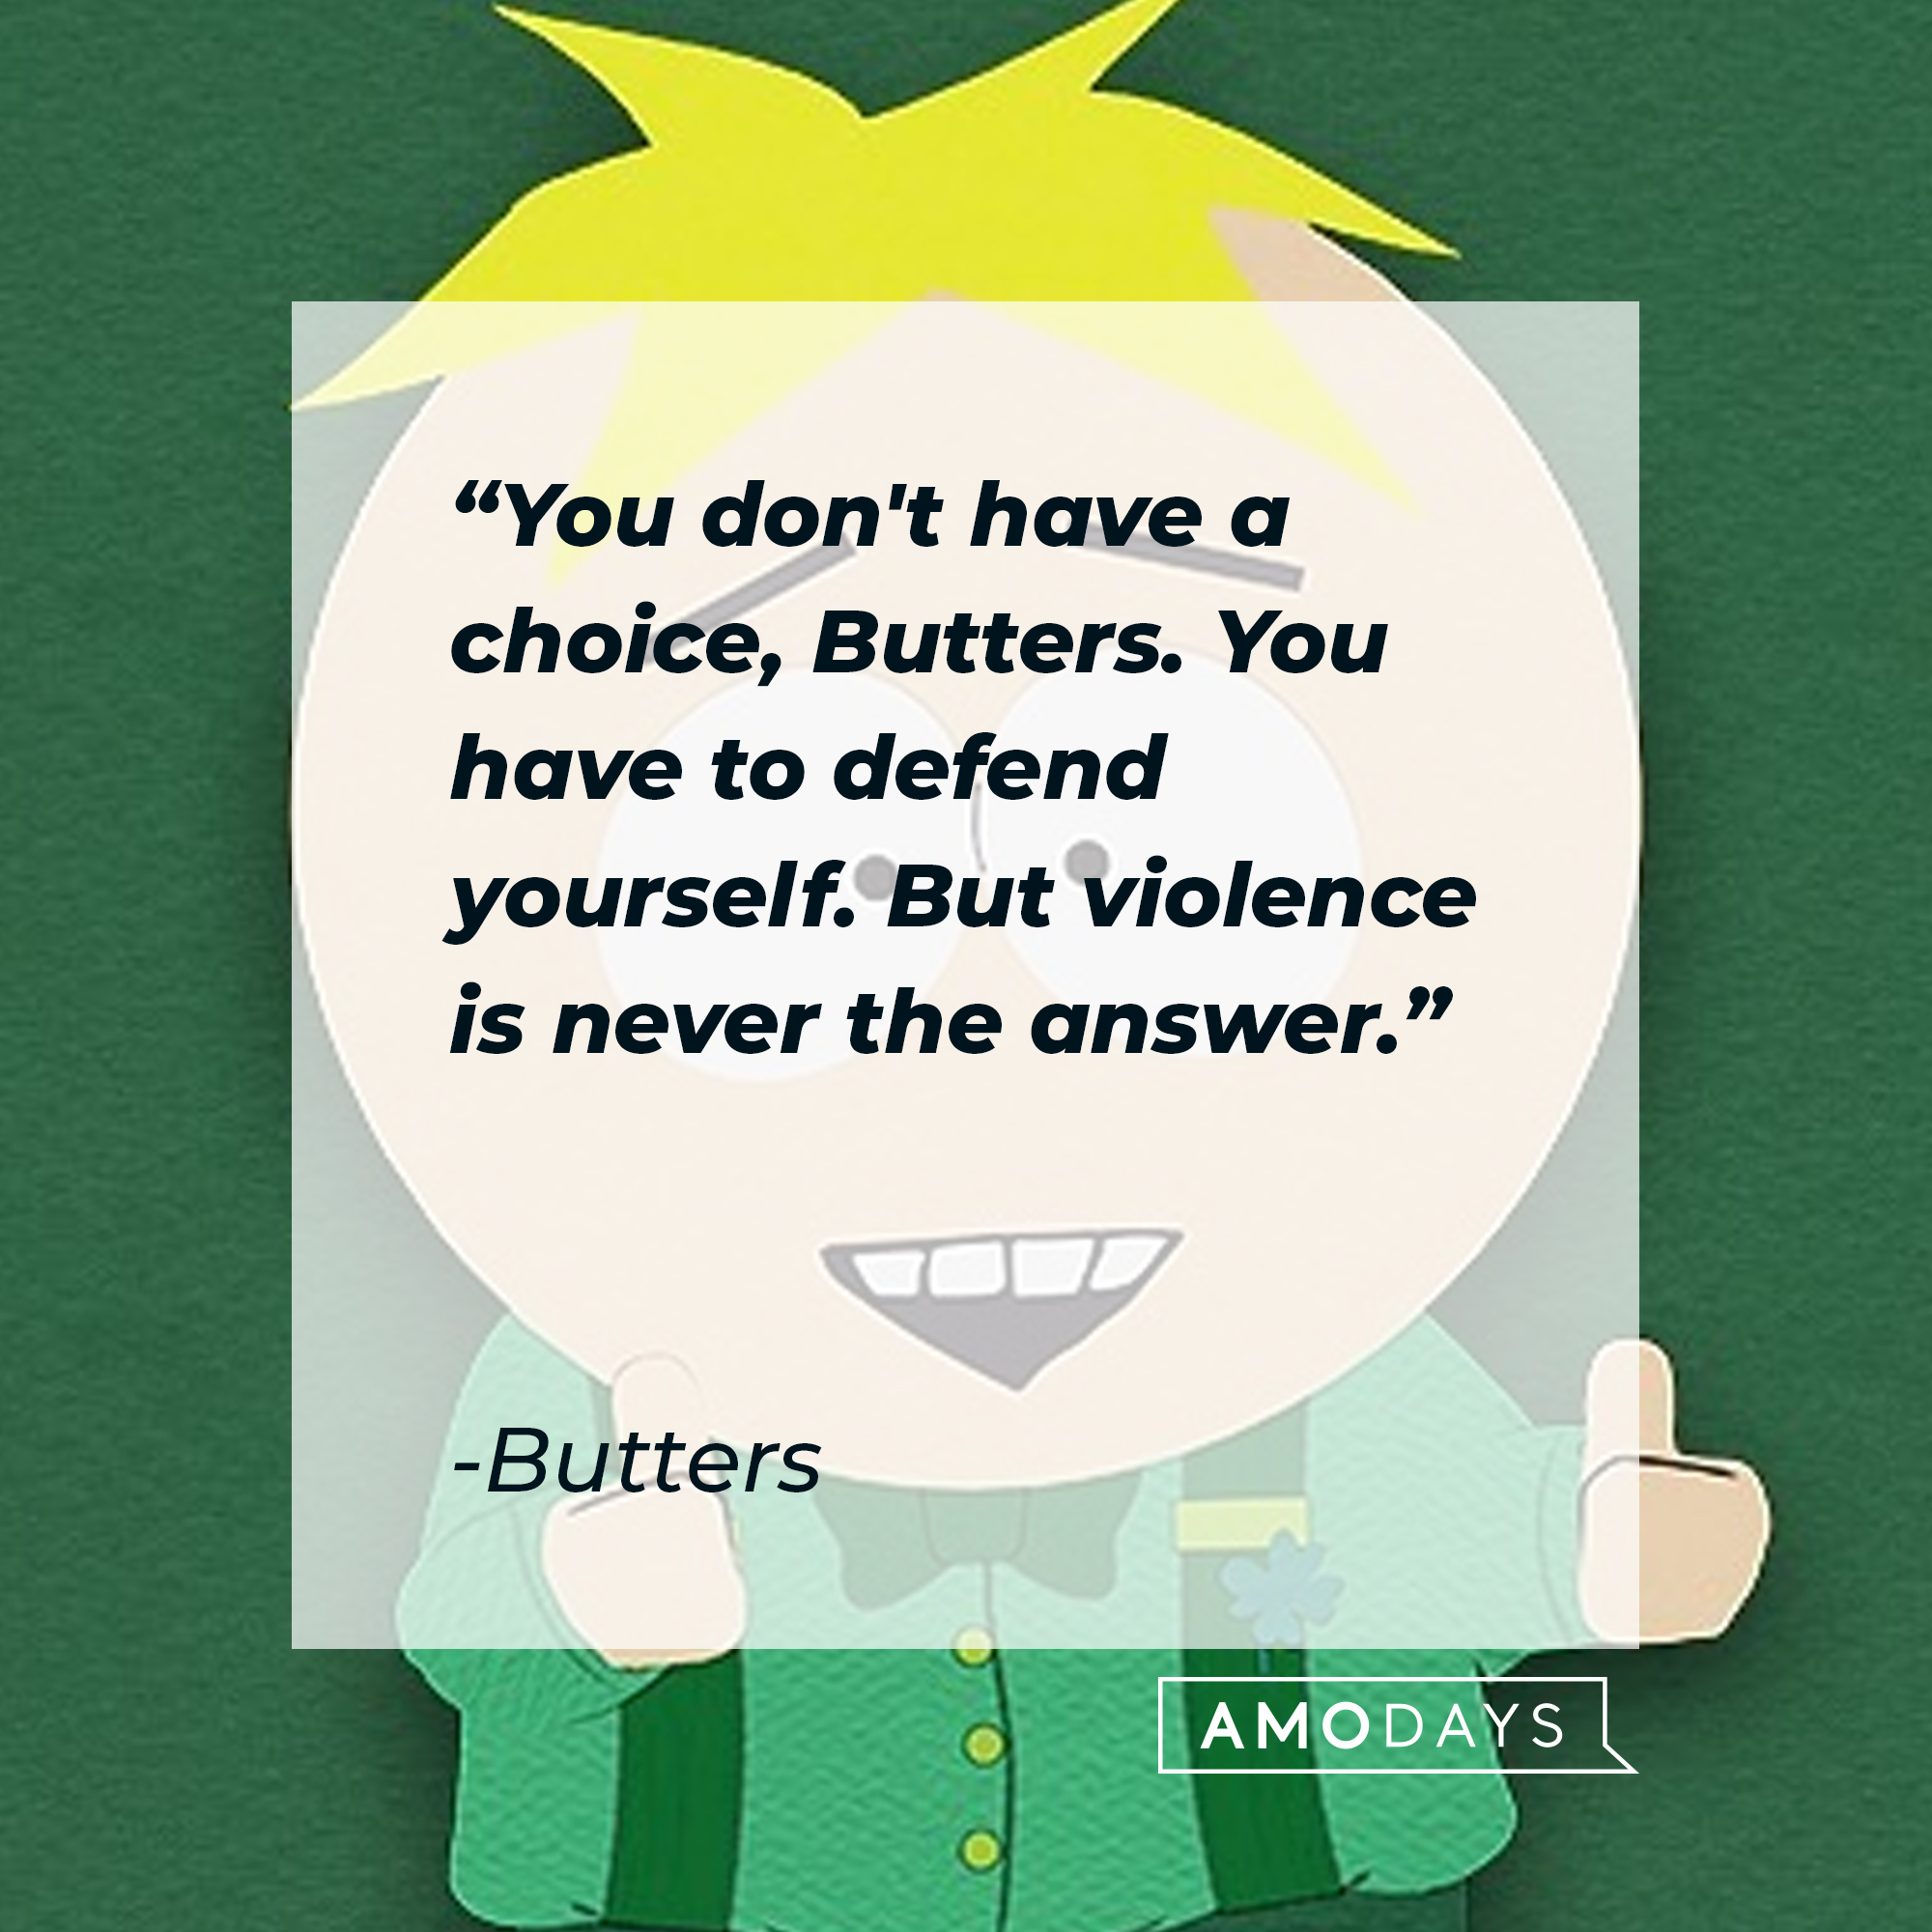 Butters' quote: "You don't have a choice, Butters. You have to defend yourself. But violence is never the answer." | Source: facebook.com/southpark